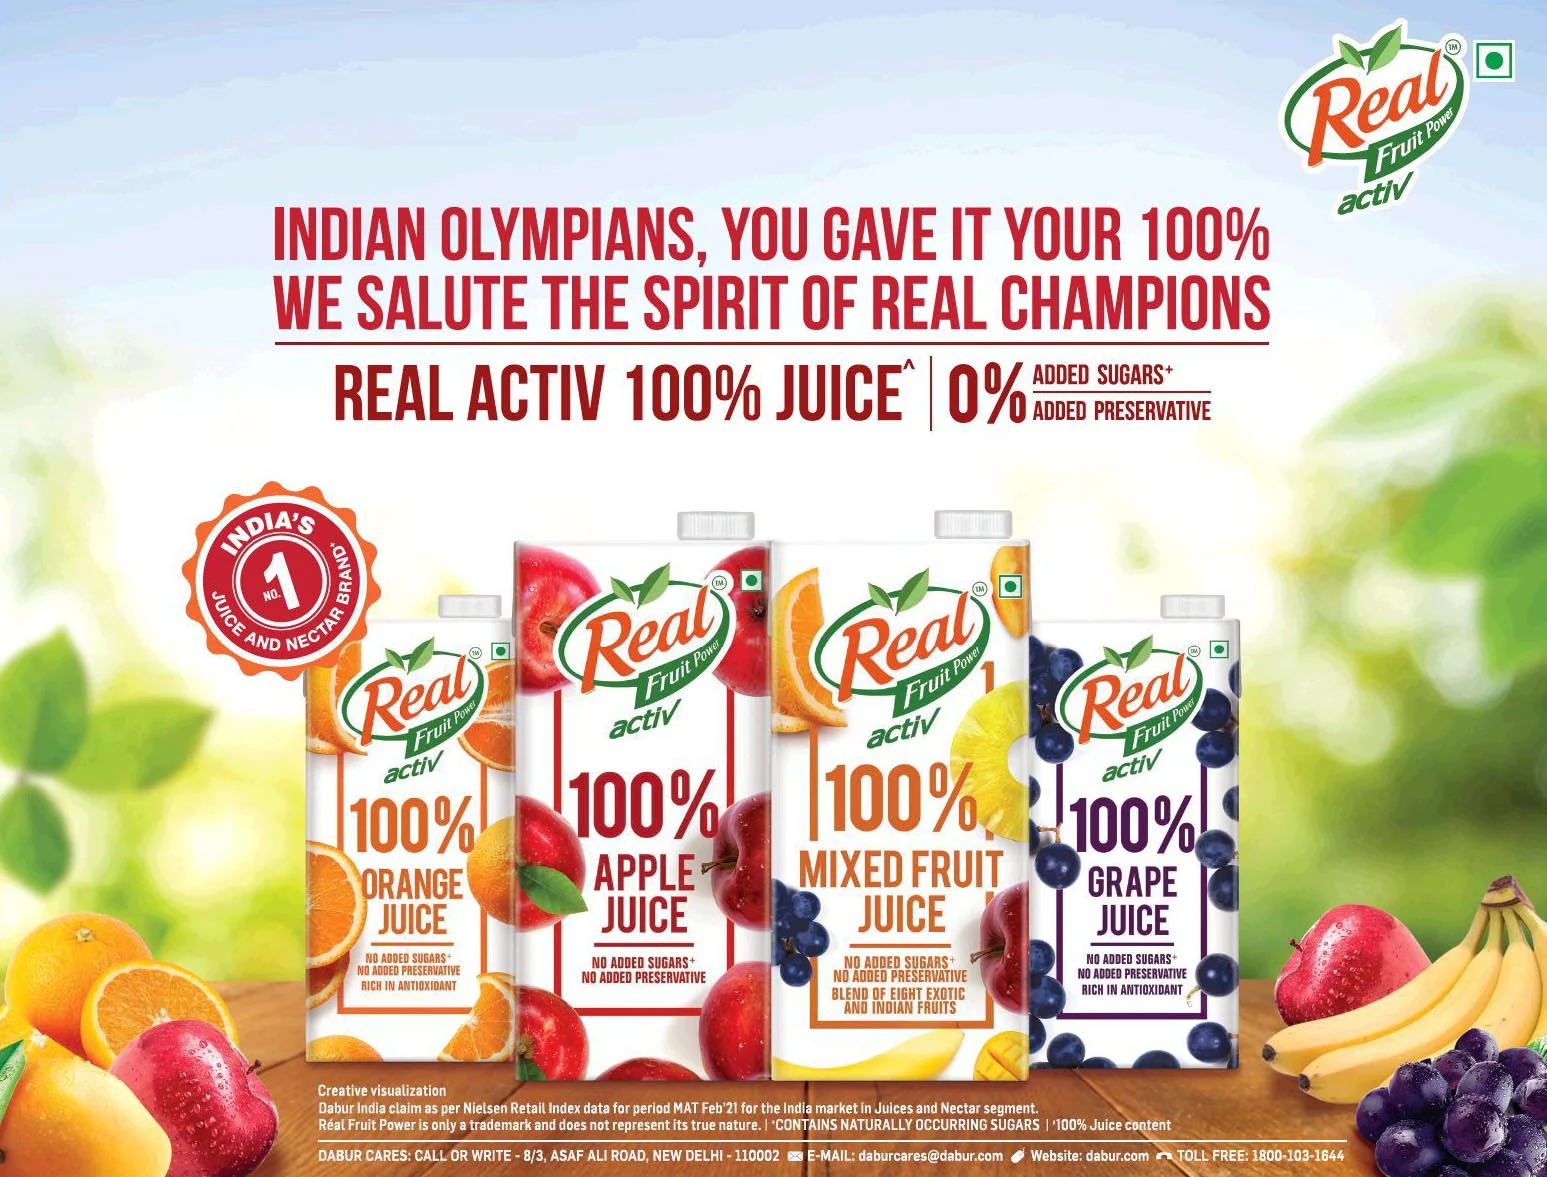 #4 Real Fruit Power Active Indian Olympians, You gave it your 100% We Salute the Spirit of Real Champions